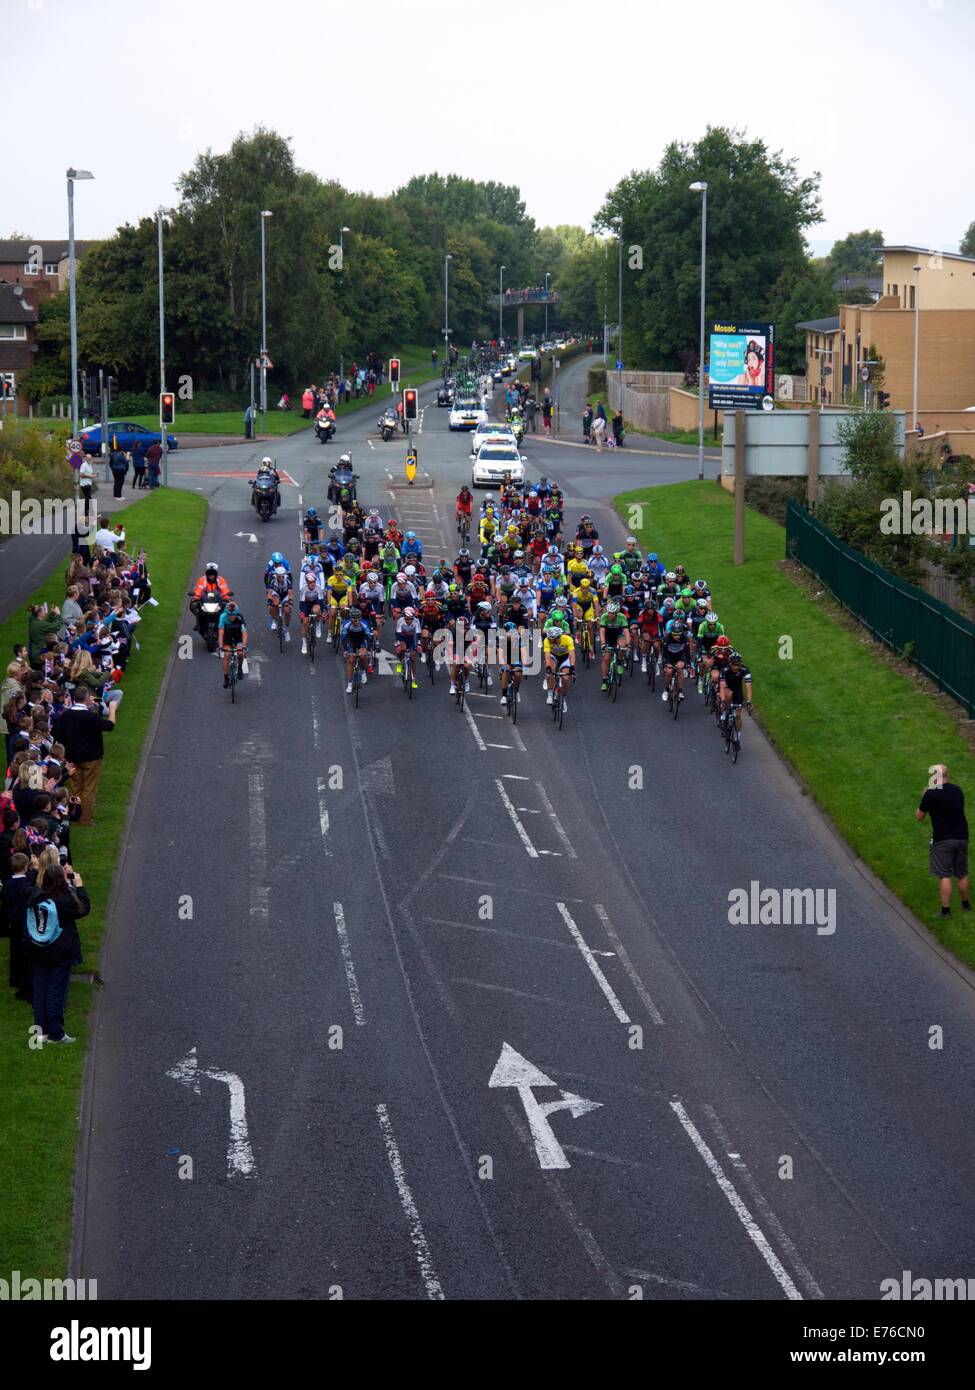 Runcorn, Halton, Cheshire, UK. 8th September, 2014. Stage 2 of the Tour of Britain passing through Runcorn, Halton on their way to finish in Llandudno, North Wales. Credit:  Dave Baxter/Alamy Live News Stock Photo